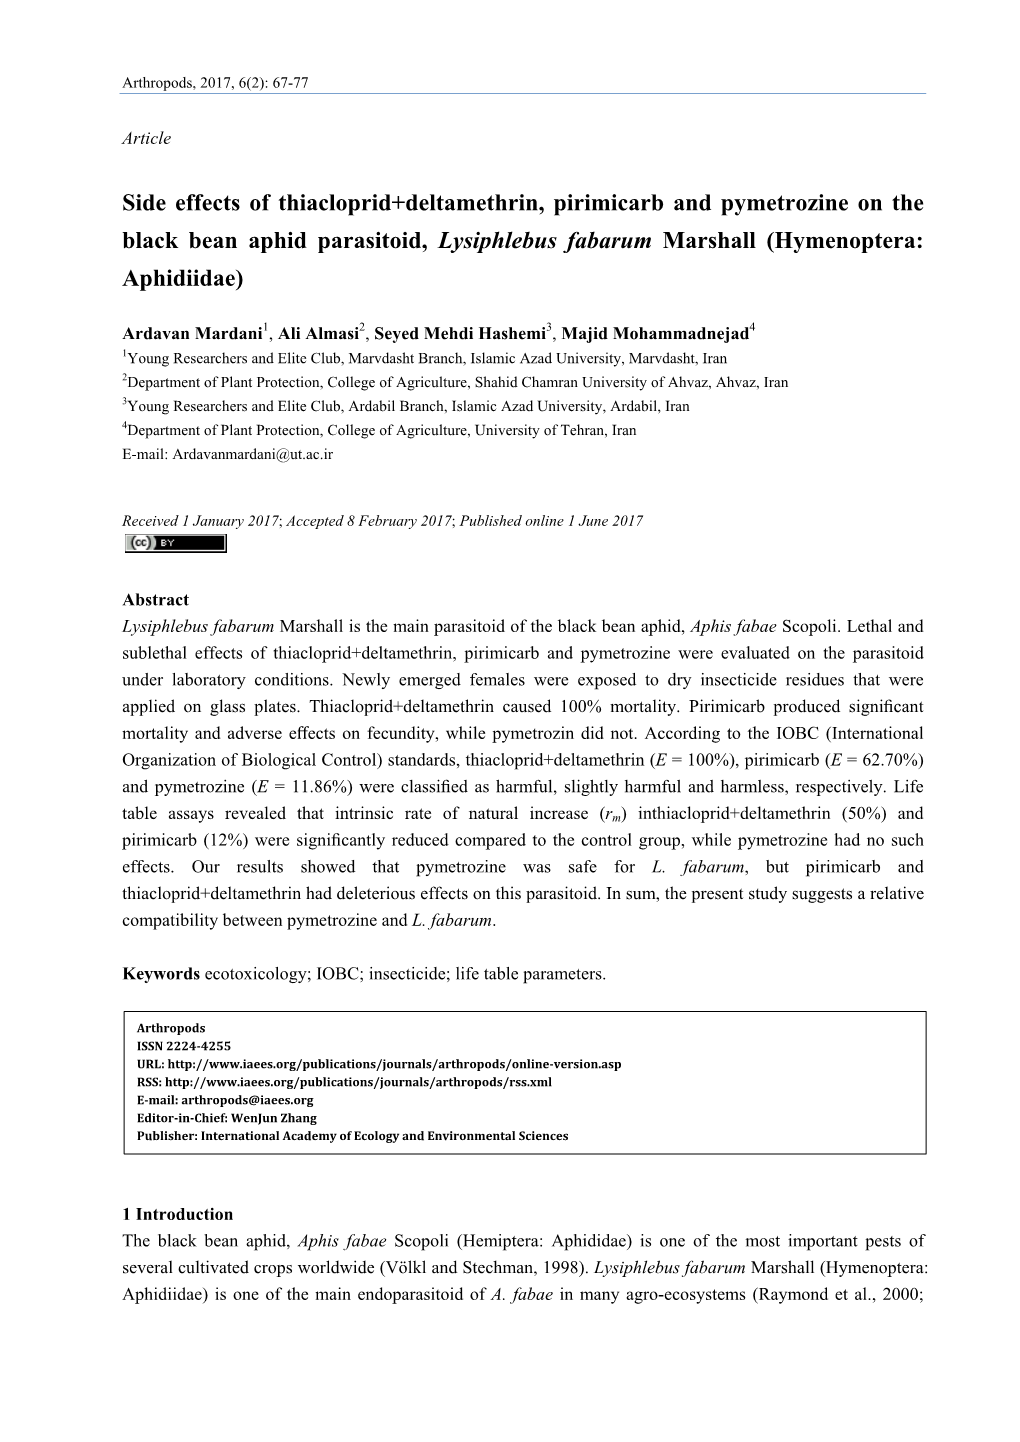 Side Effects of Thiacloprid+Deltamethrin, Pirimicarb and Pymetrozine on the Black Bean Aphid Parasitoid, Lysiphlebus Fabarum Marshall (Hymenoptera: Aphidiidae)